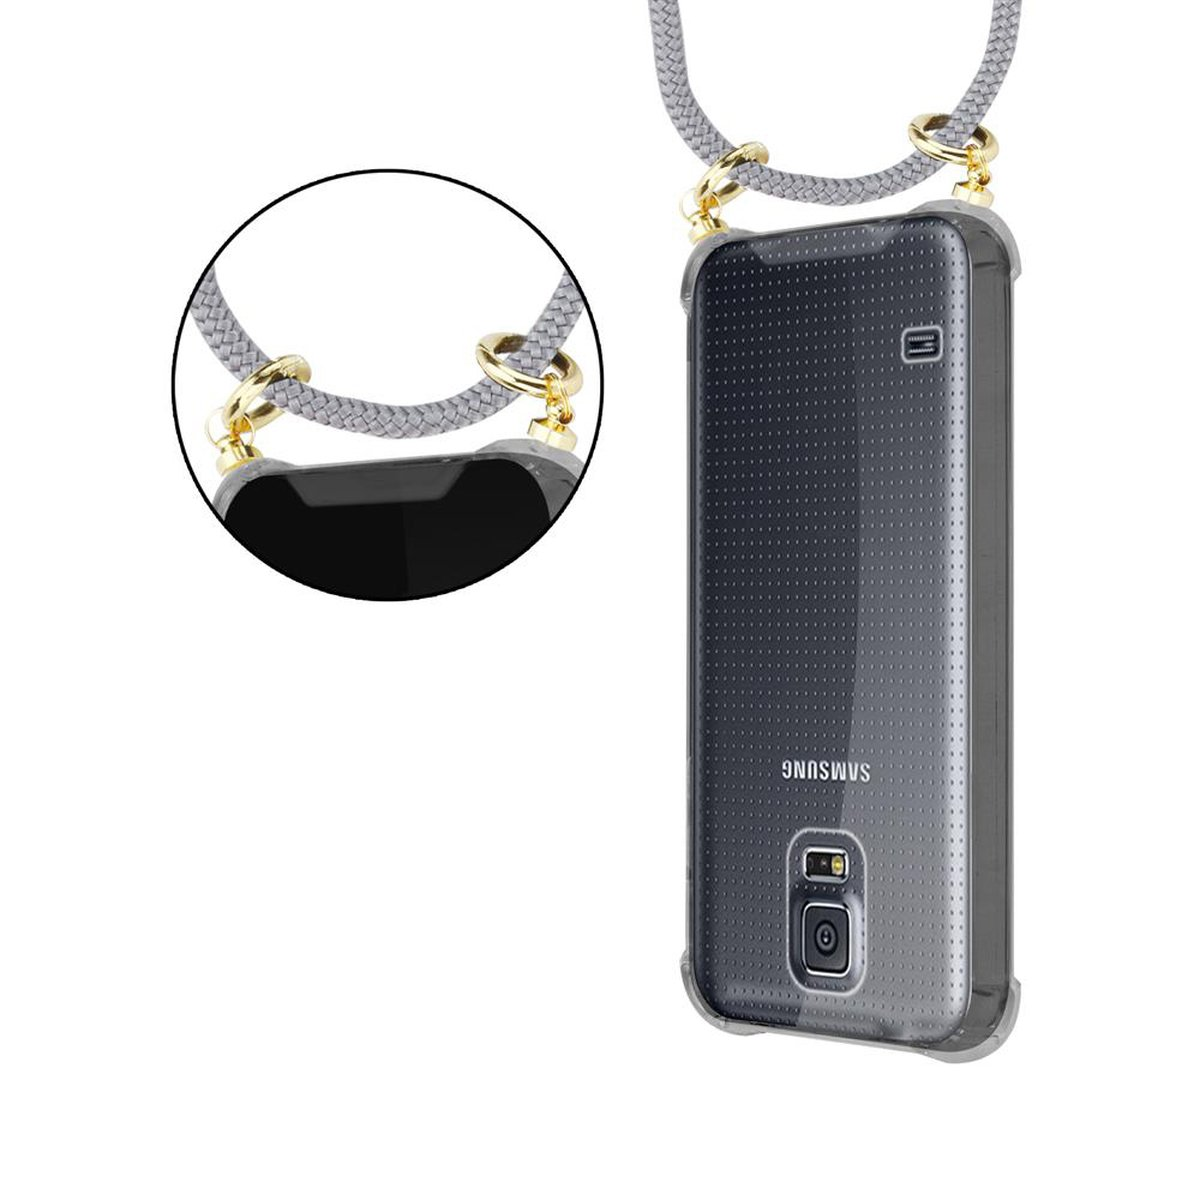 NEO, Ringen, Kette und Gold S5 CADORABO S5 Galaxy Handy SILBER Samsung, Backcover, Hülle, abnehmbarer / GRAU mit Kordel Band